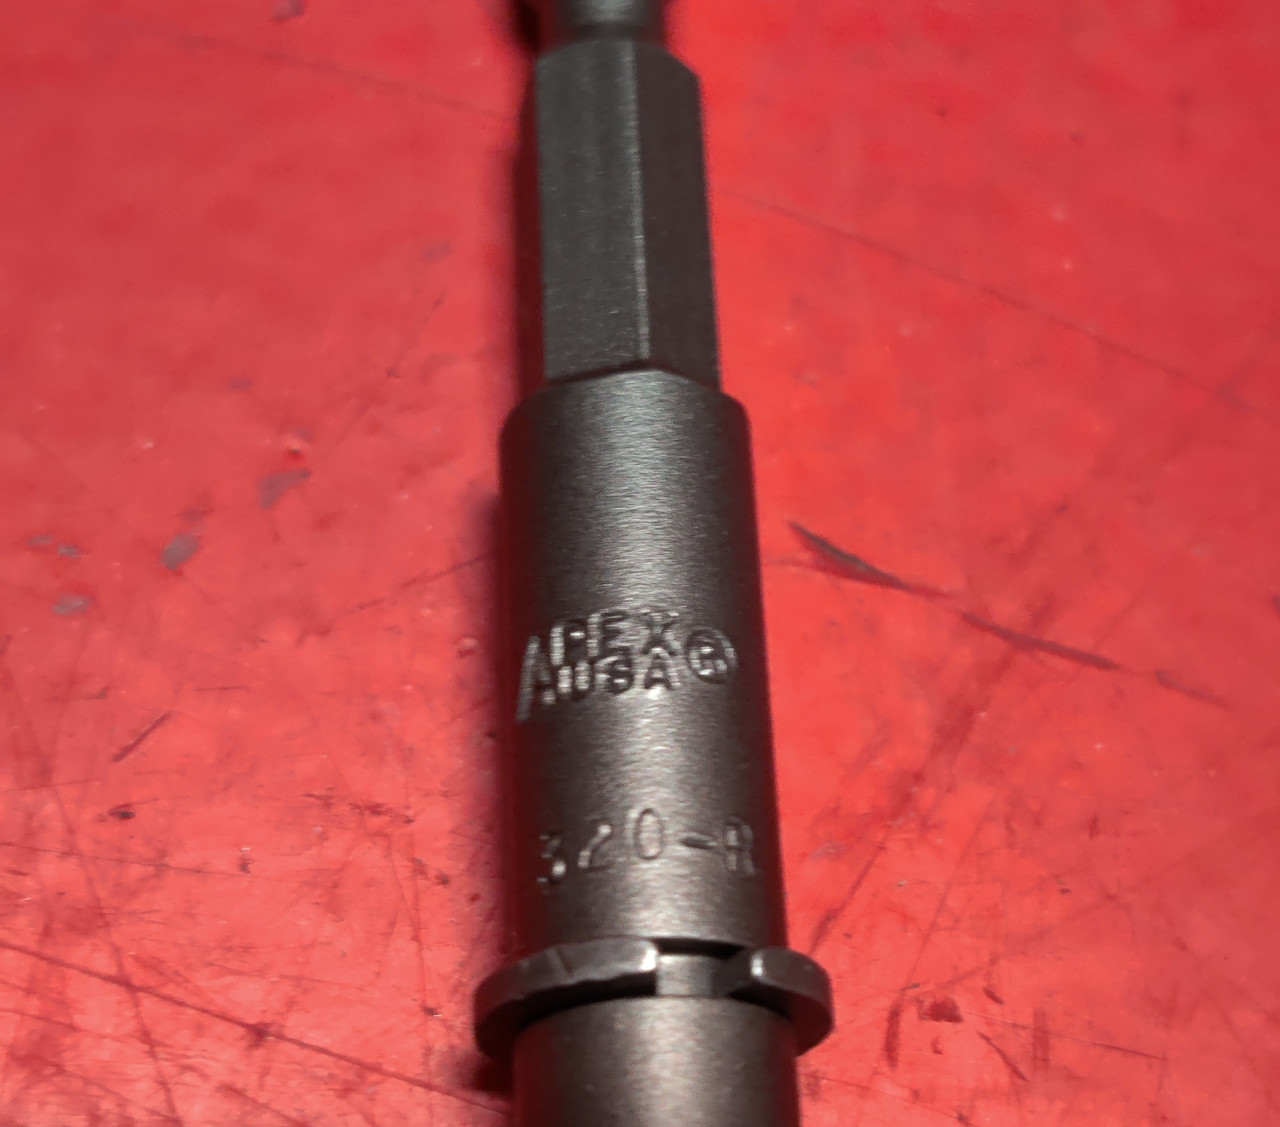  Apex 320-RX 1/4'' Slotted Hex Power Drive Bit